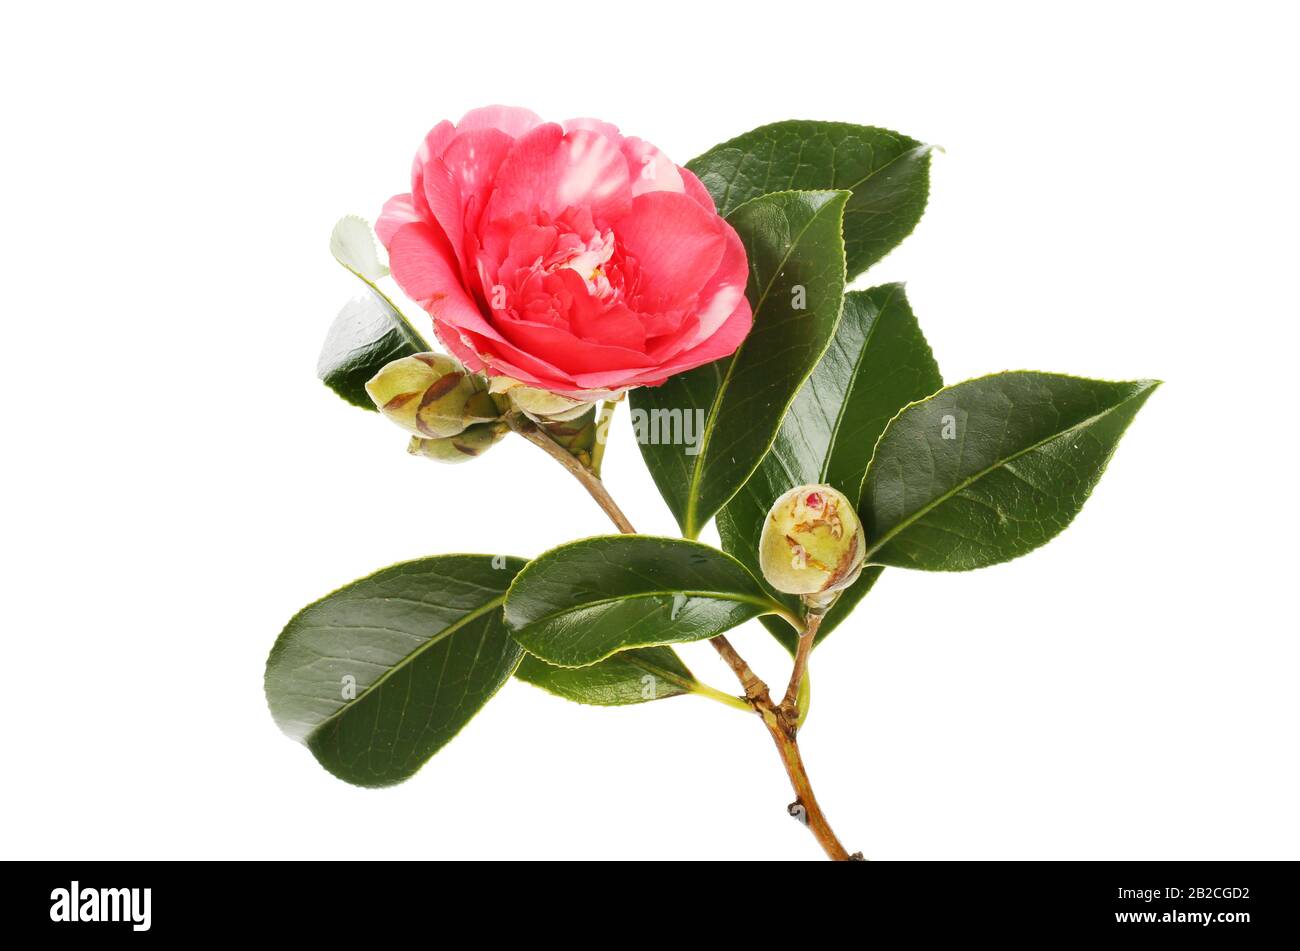 Red and white camellia flower, buds and foliage isolated against white Stock Photo